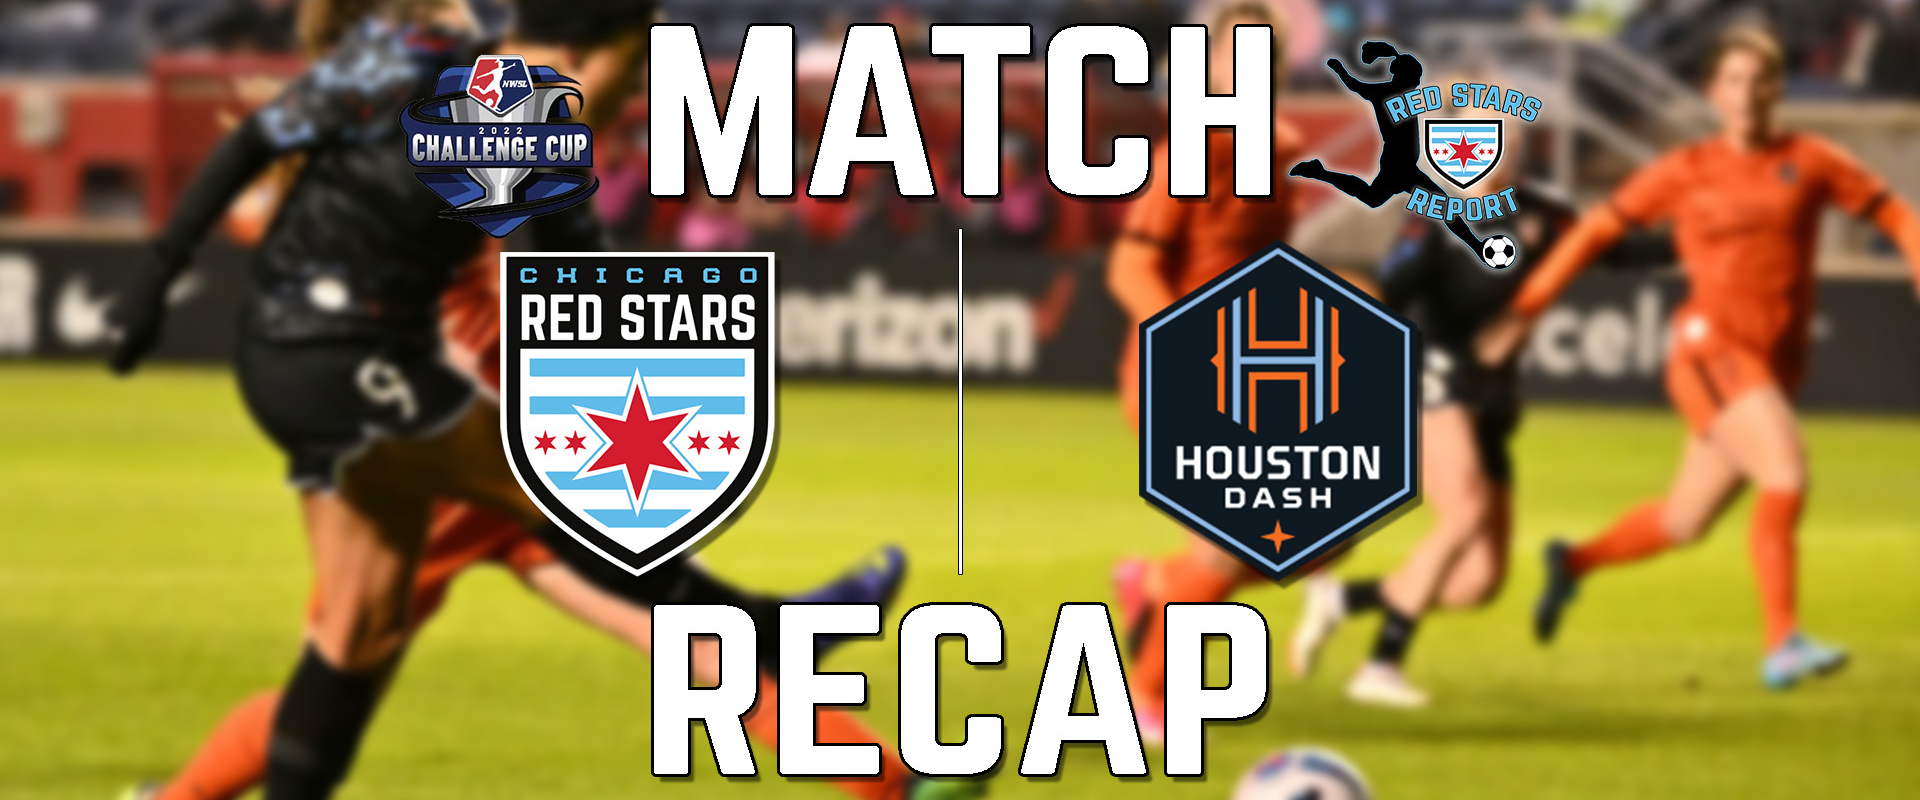 Pugh Scores Second Brace of the NWSL Challenge Cup, Red Stars Complete Sweep of Dash in Chicago